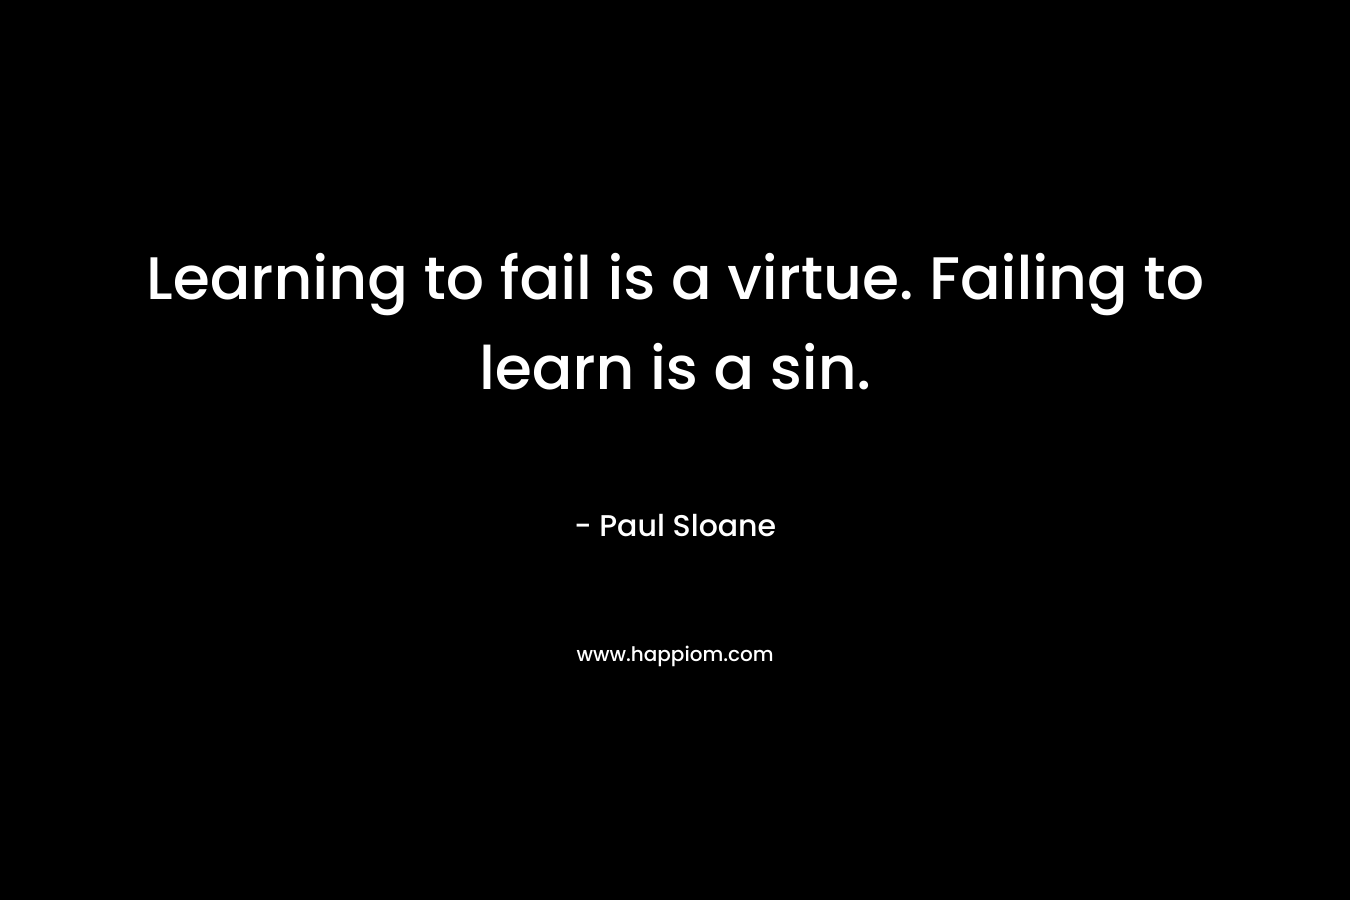 Learning to fail is a virtue. Failing to learn is a sin. – Paul Sloane